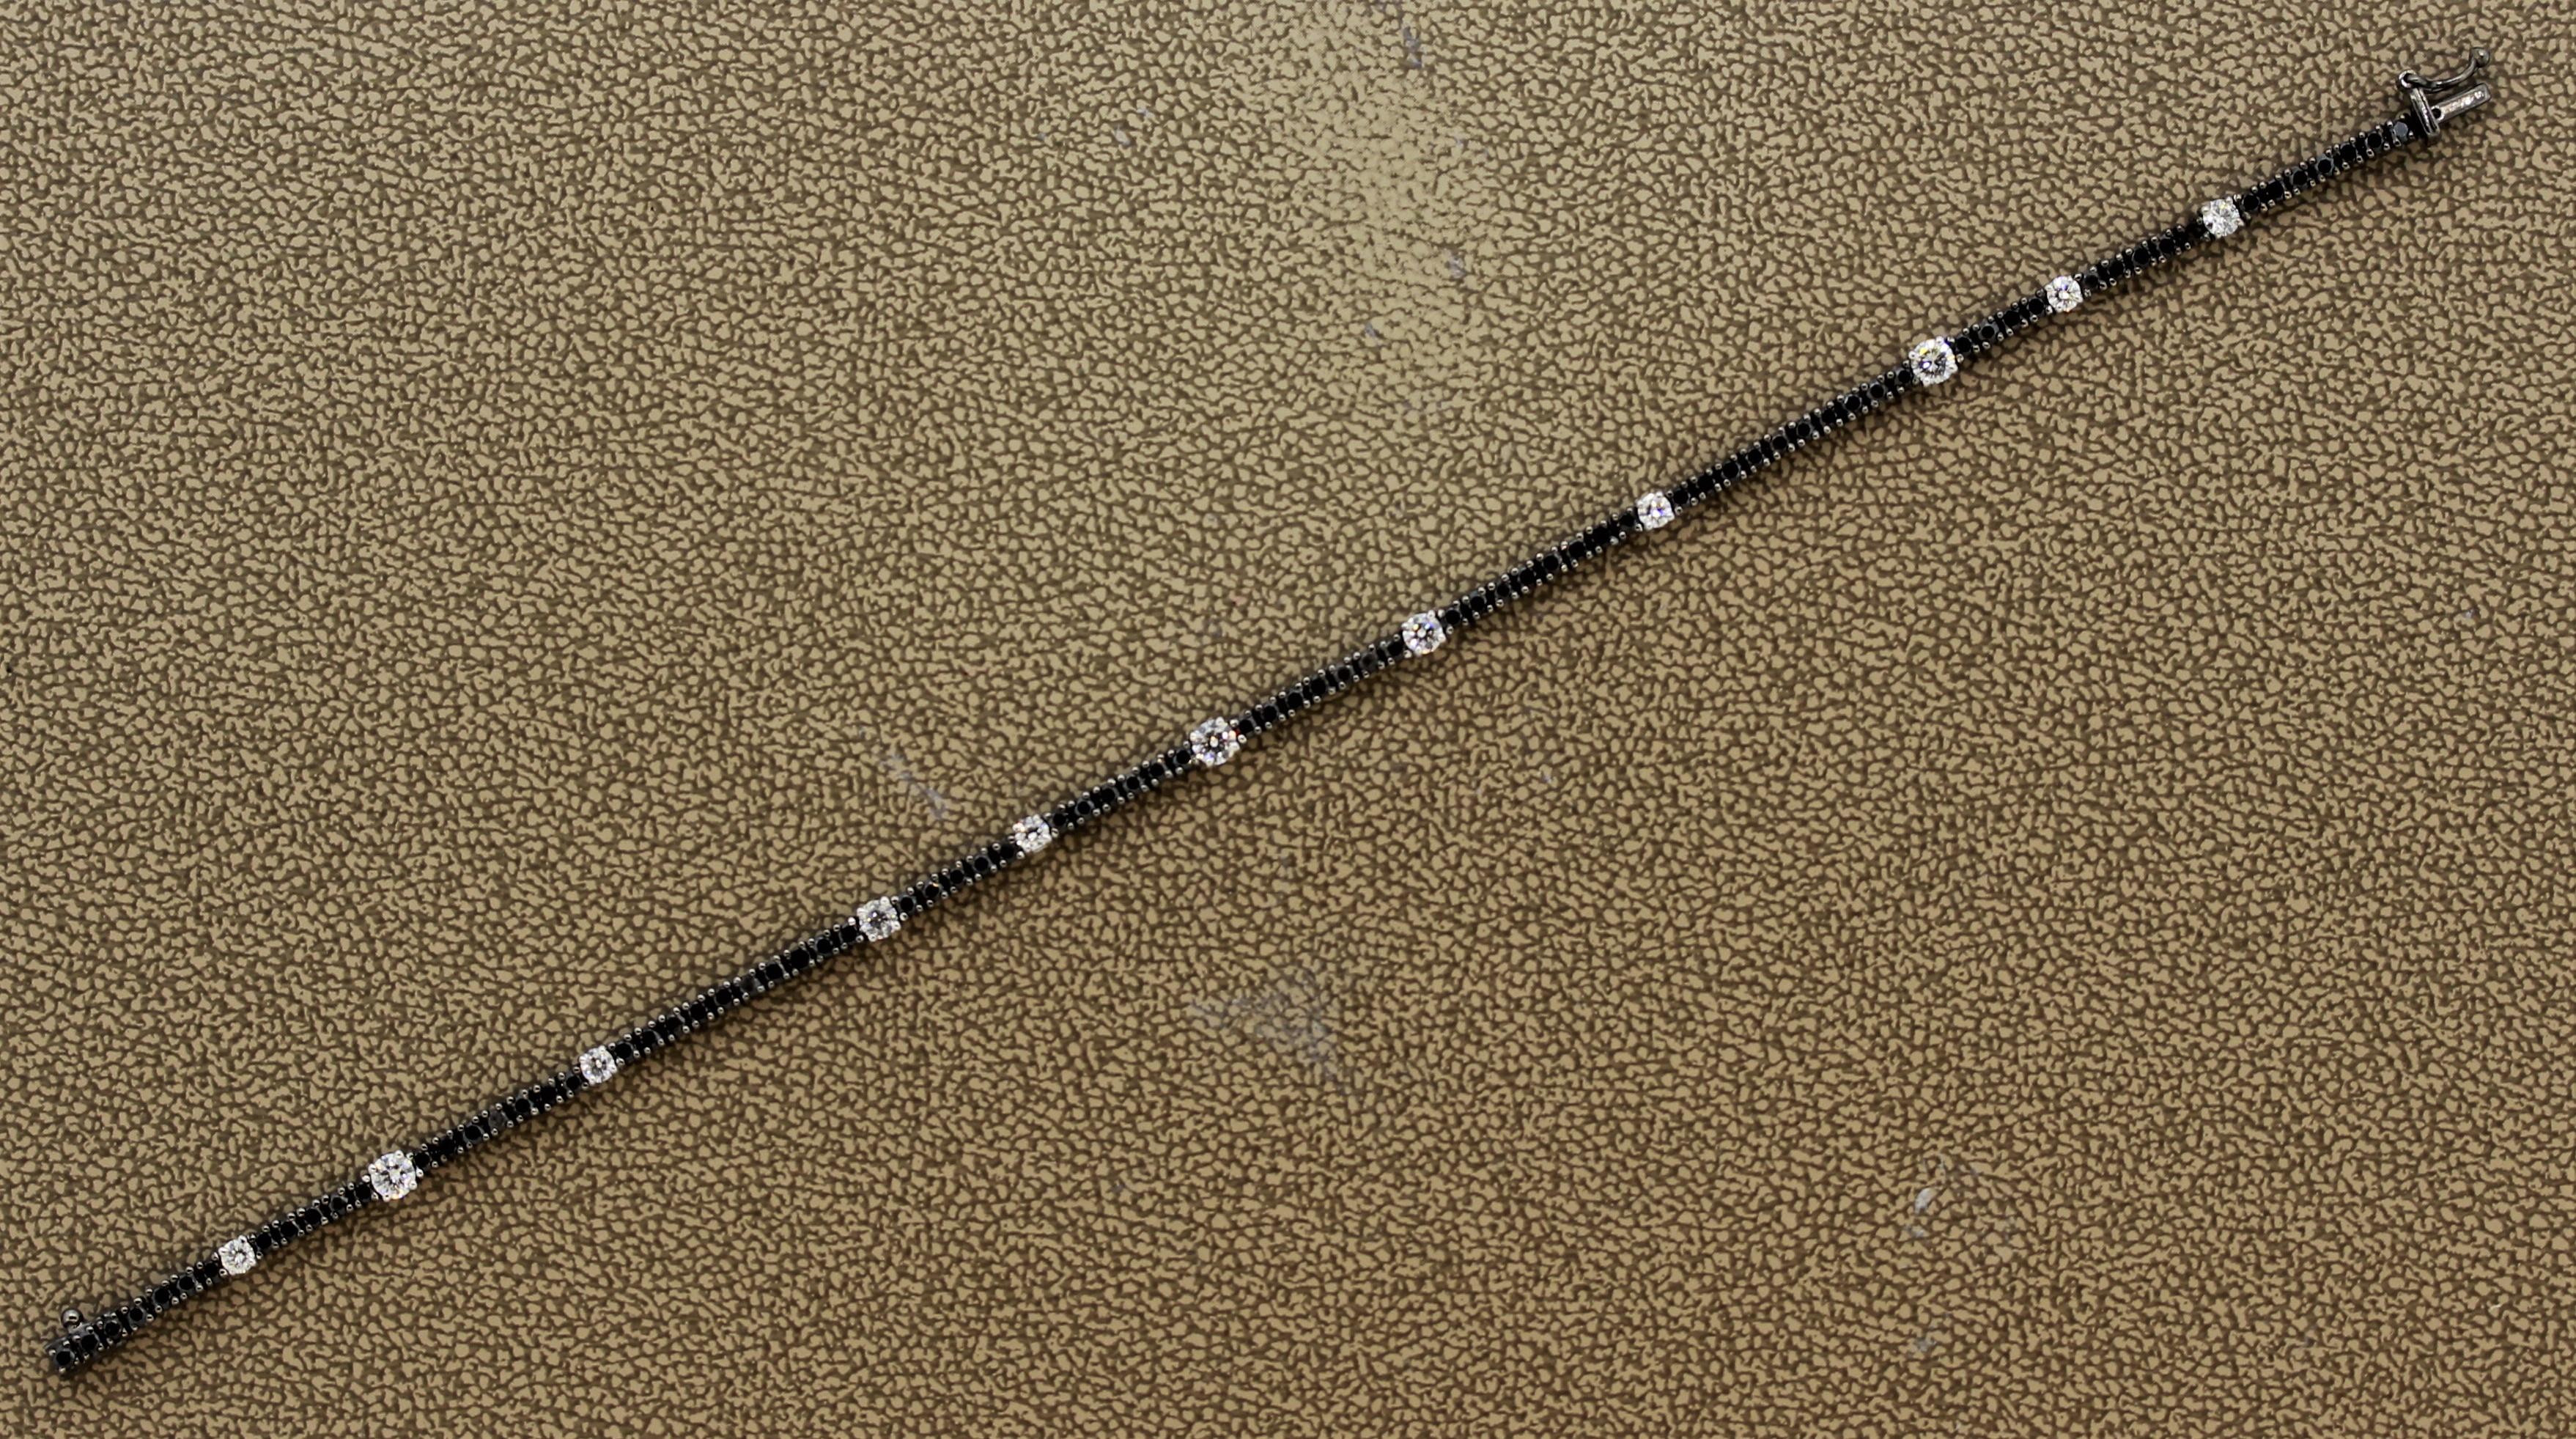 A thin and comfortable tennis bracelet featuring black and white diamonds. There are 0.74 carats of white round brilliant cut diamonds along with 1.59 carats of black diamonds. Set in 18k gold with a rhodium finish that gives the piece a unique